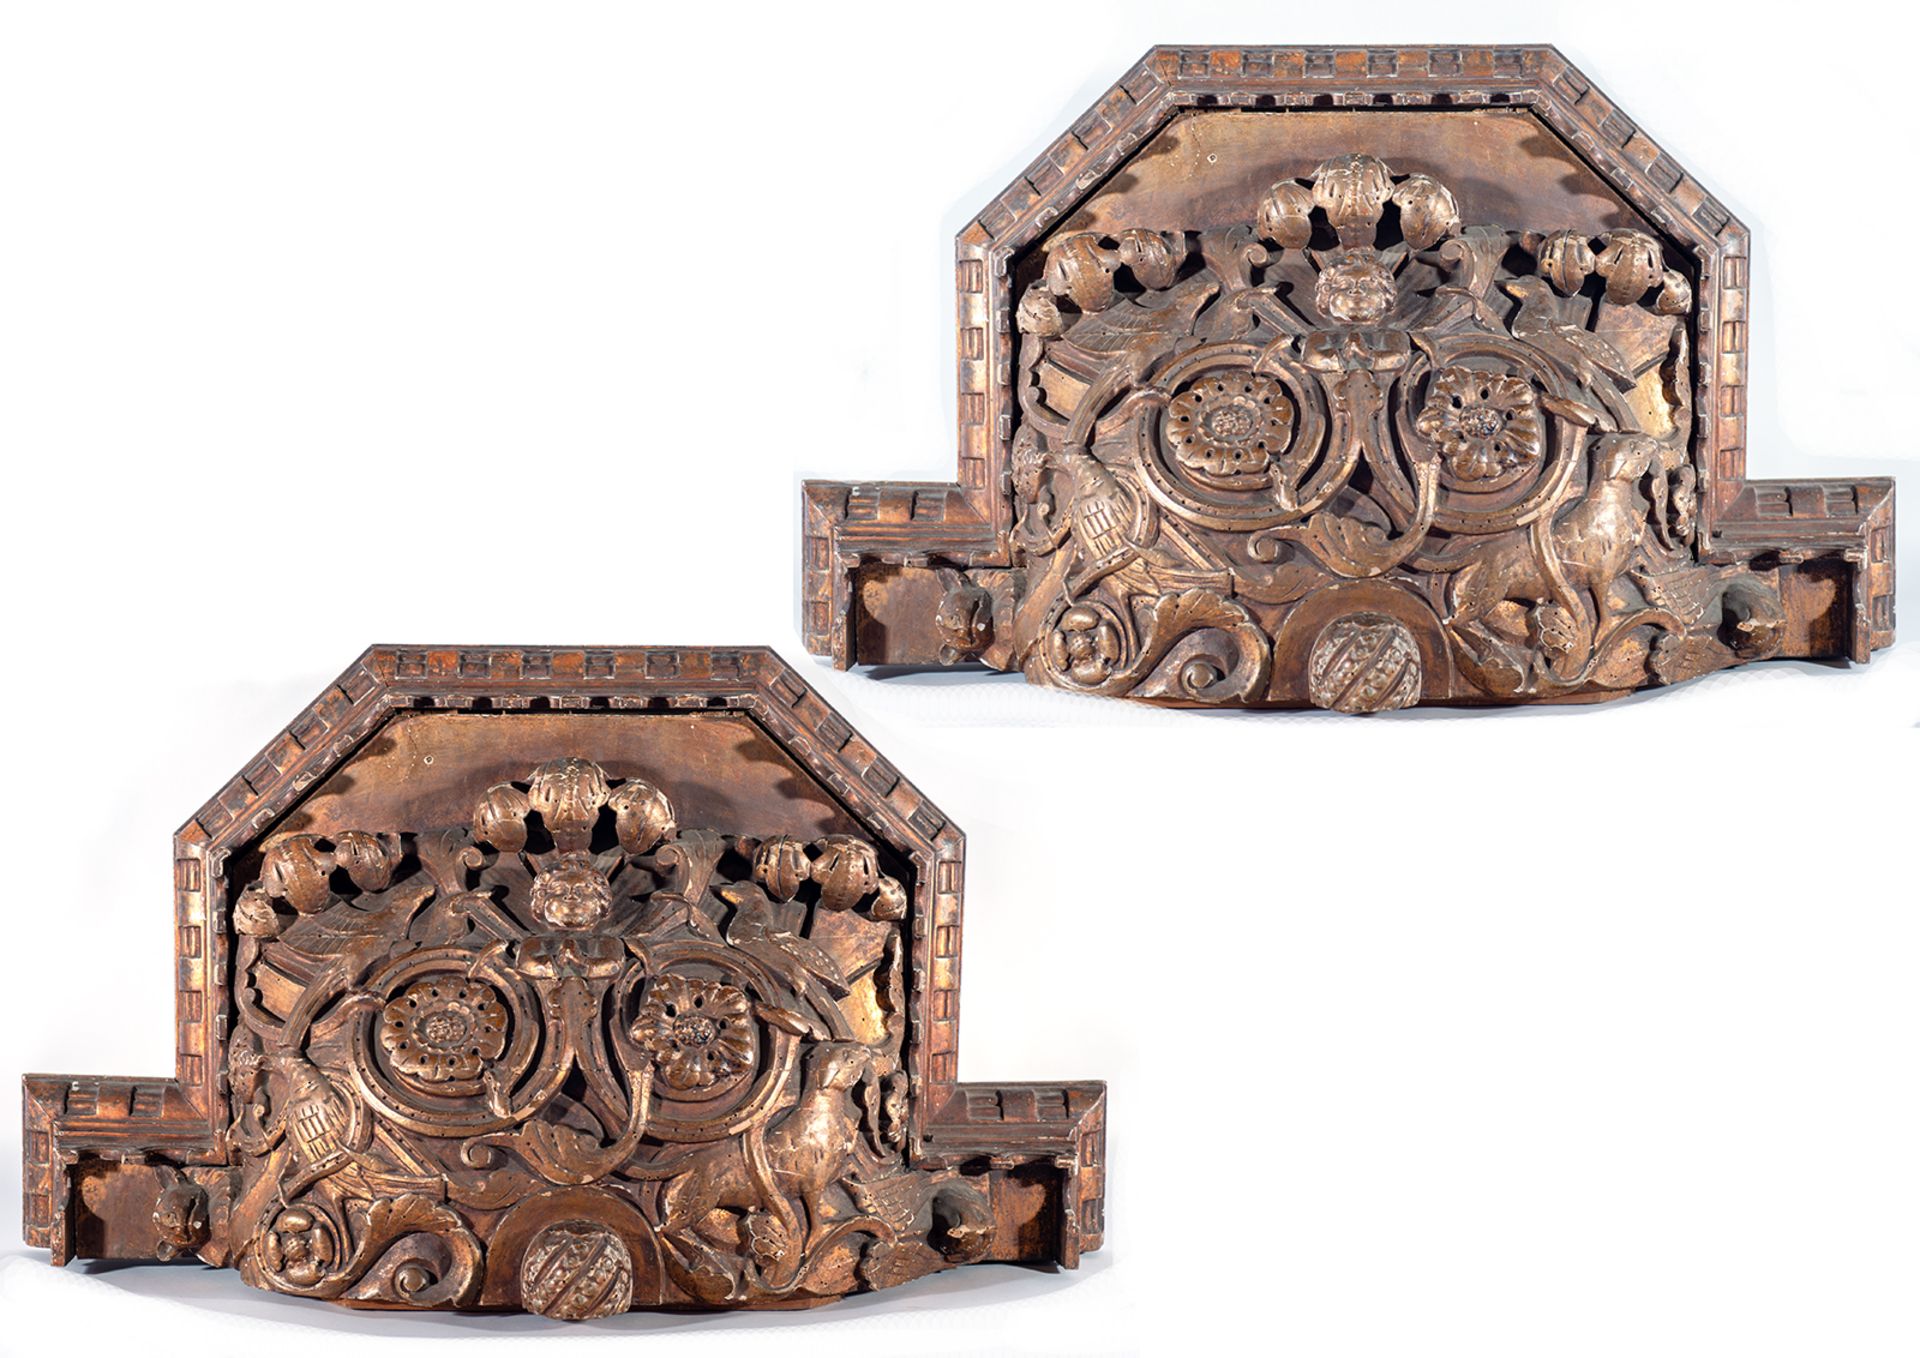 Pair of important wall corbels, Spain, 18th century